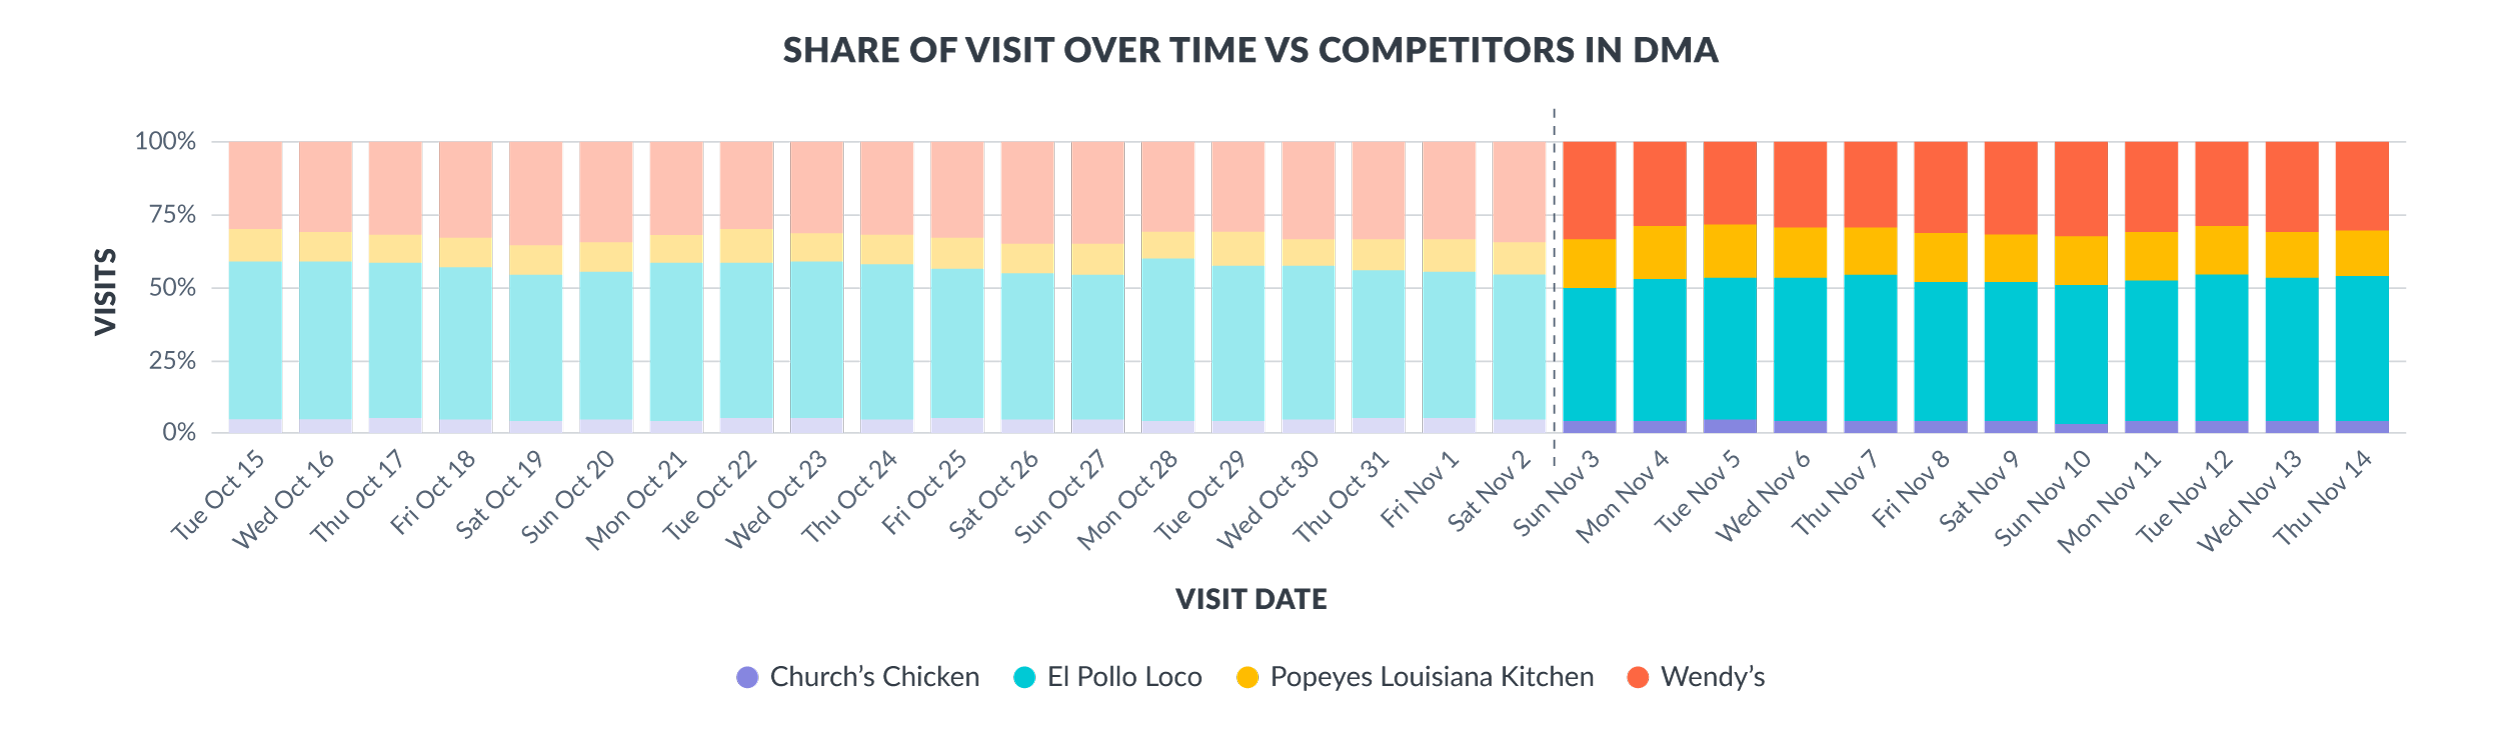 Share of visit over time vs competitors in DMA